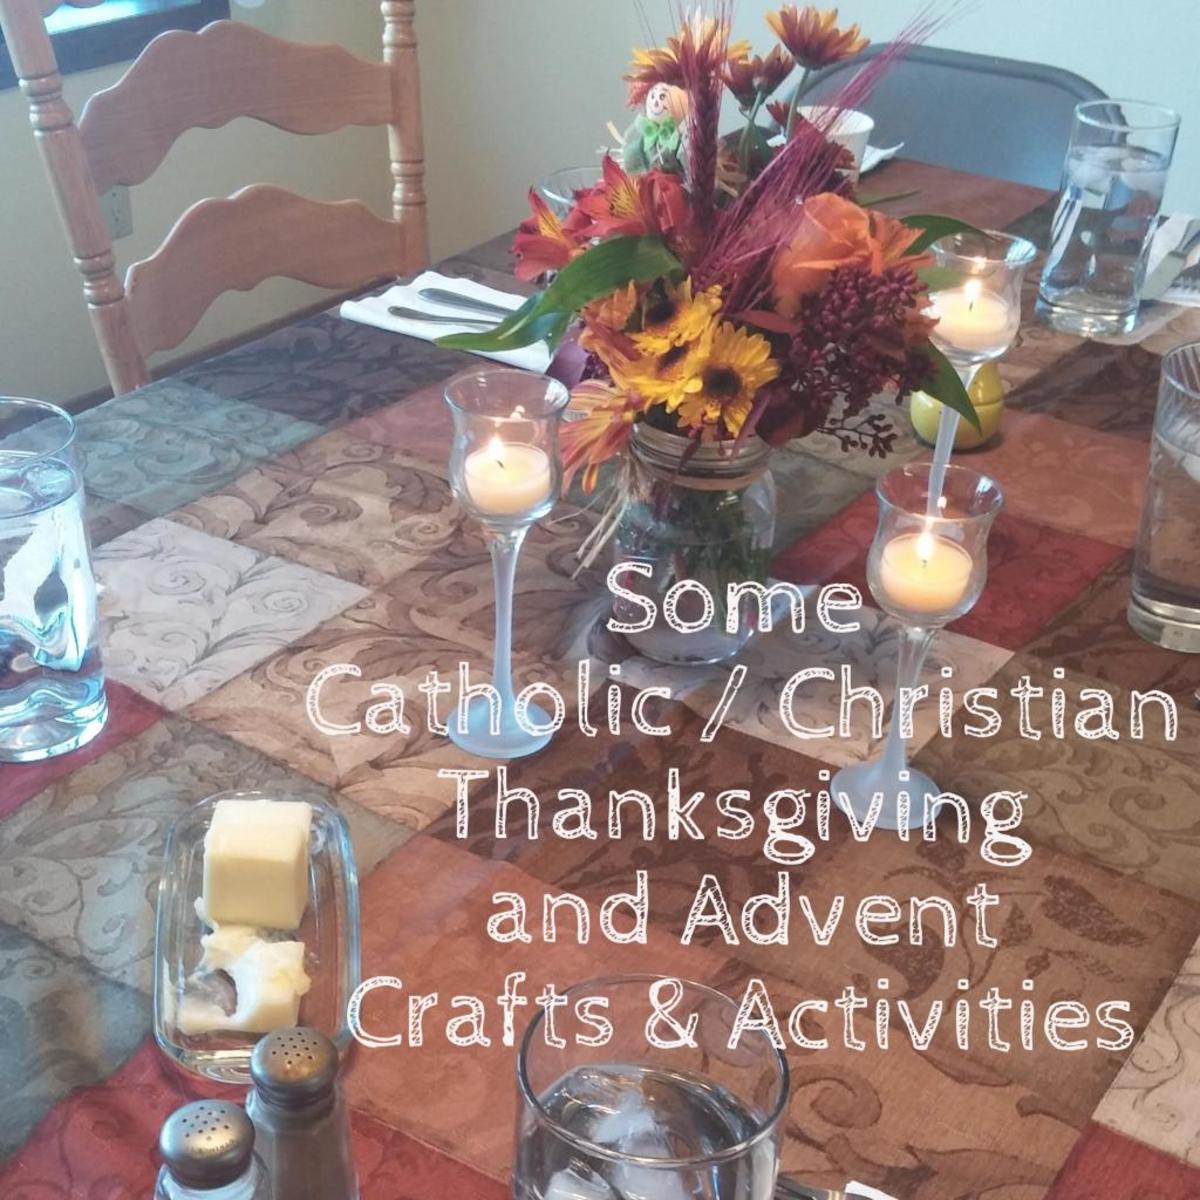 Some Catholic / Christian Thanksgiving and Advent Crafts and Activities